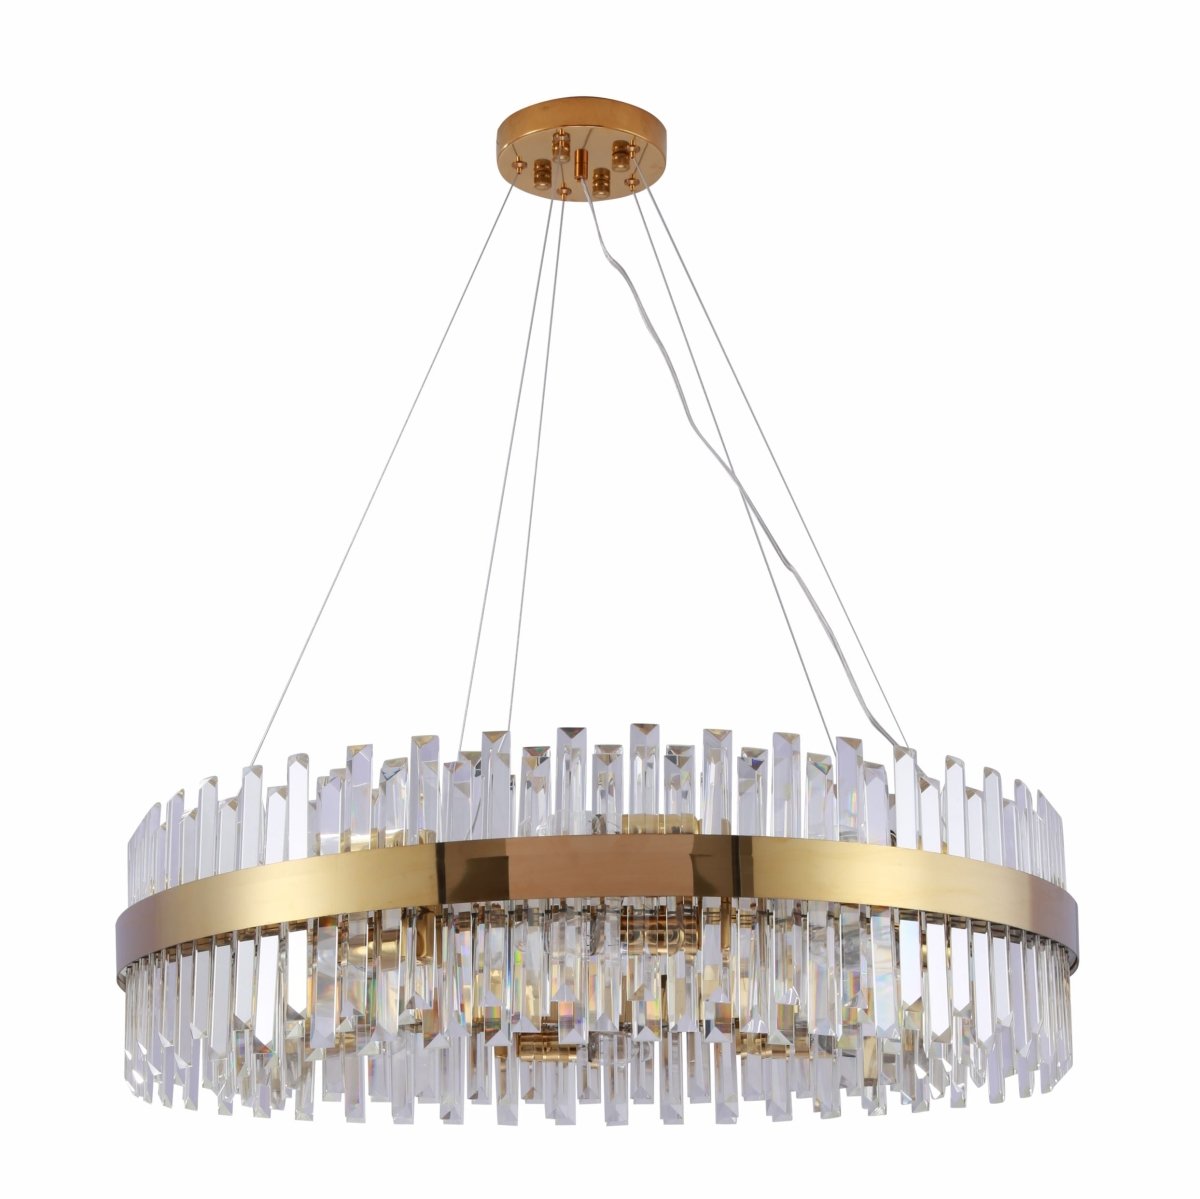 Main image of Coffin Crystal Gold Metal Chandelier D800 with 20xE14 Fitting | TEKLED 156-19560